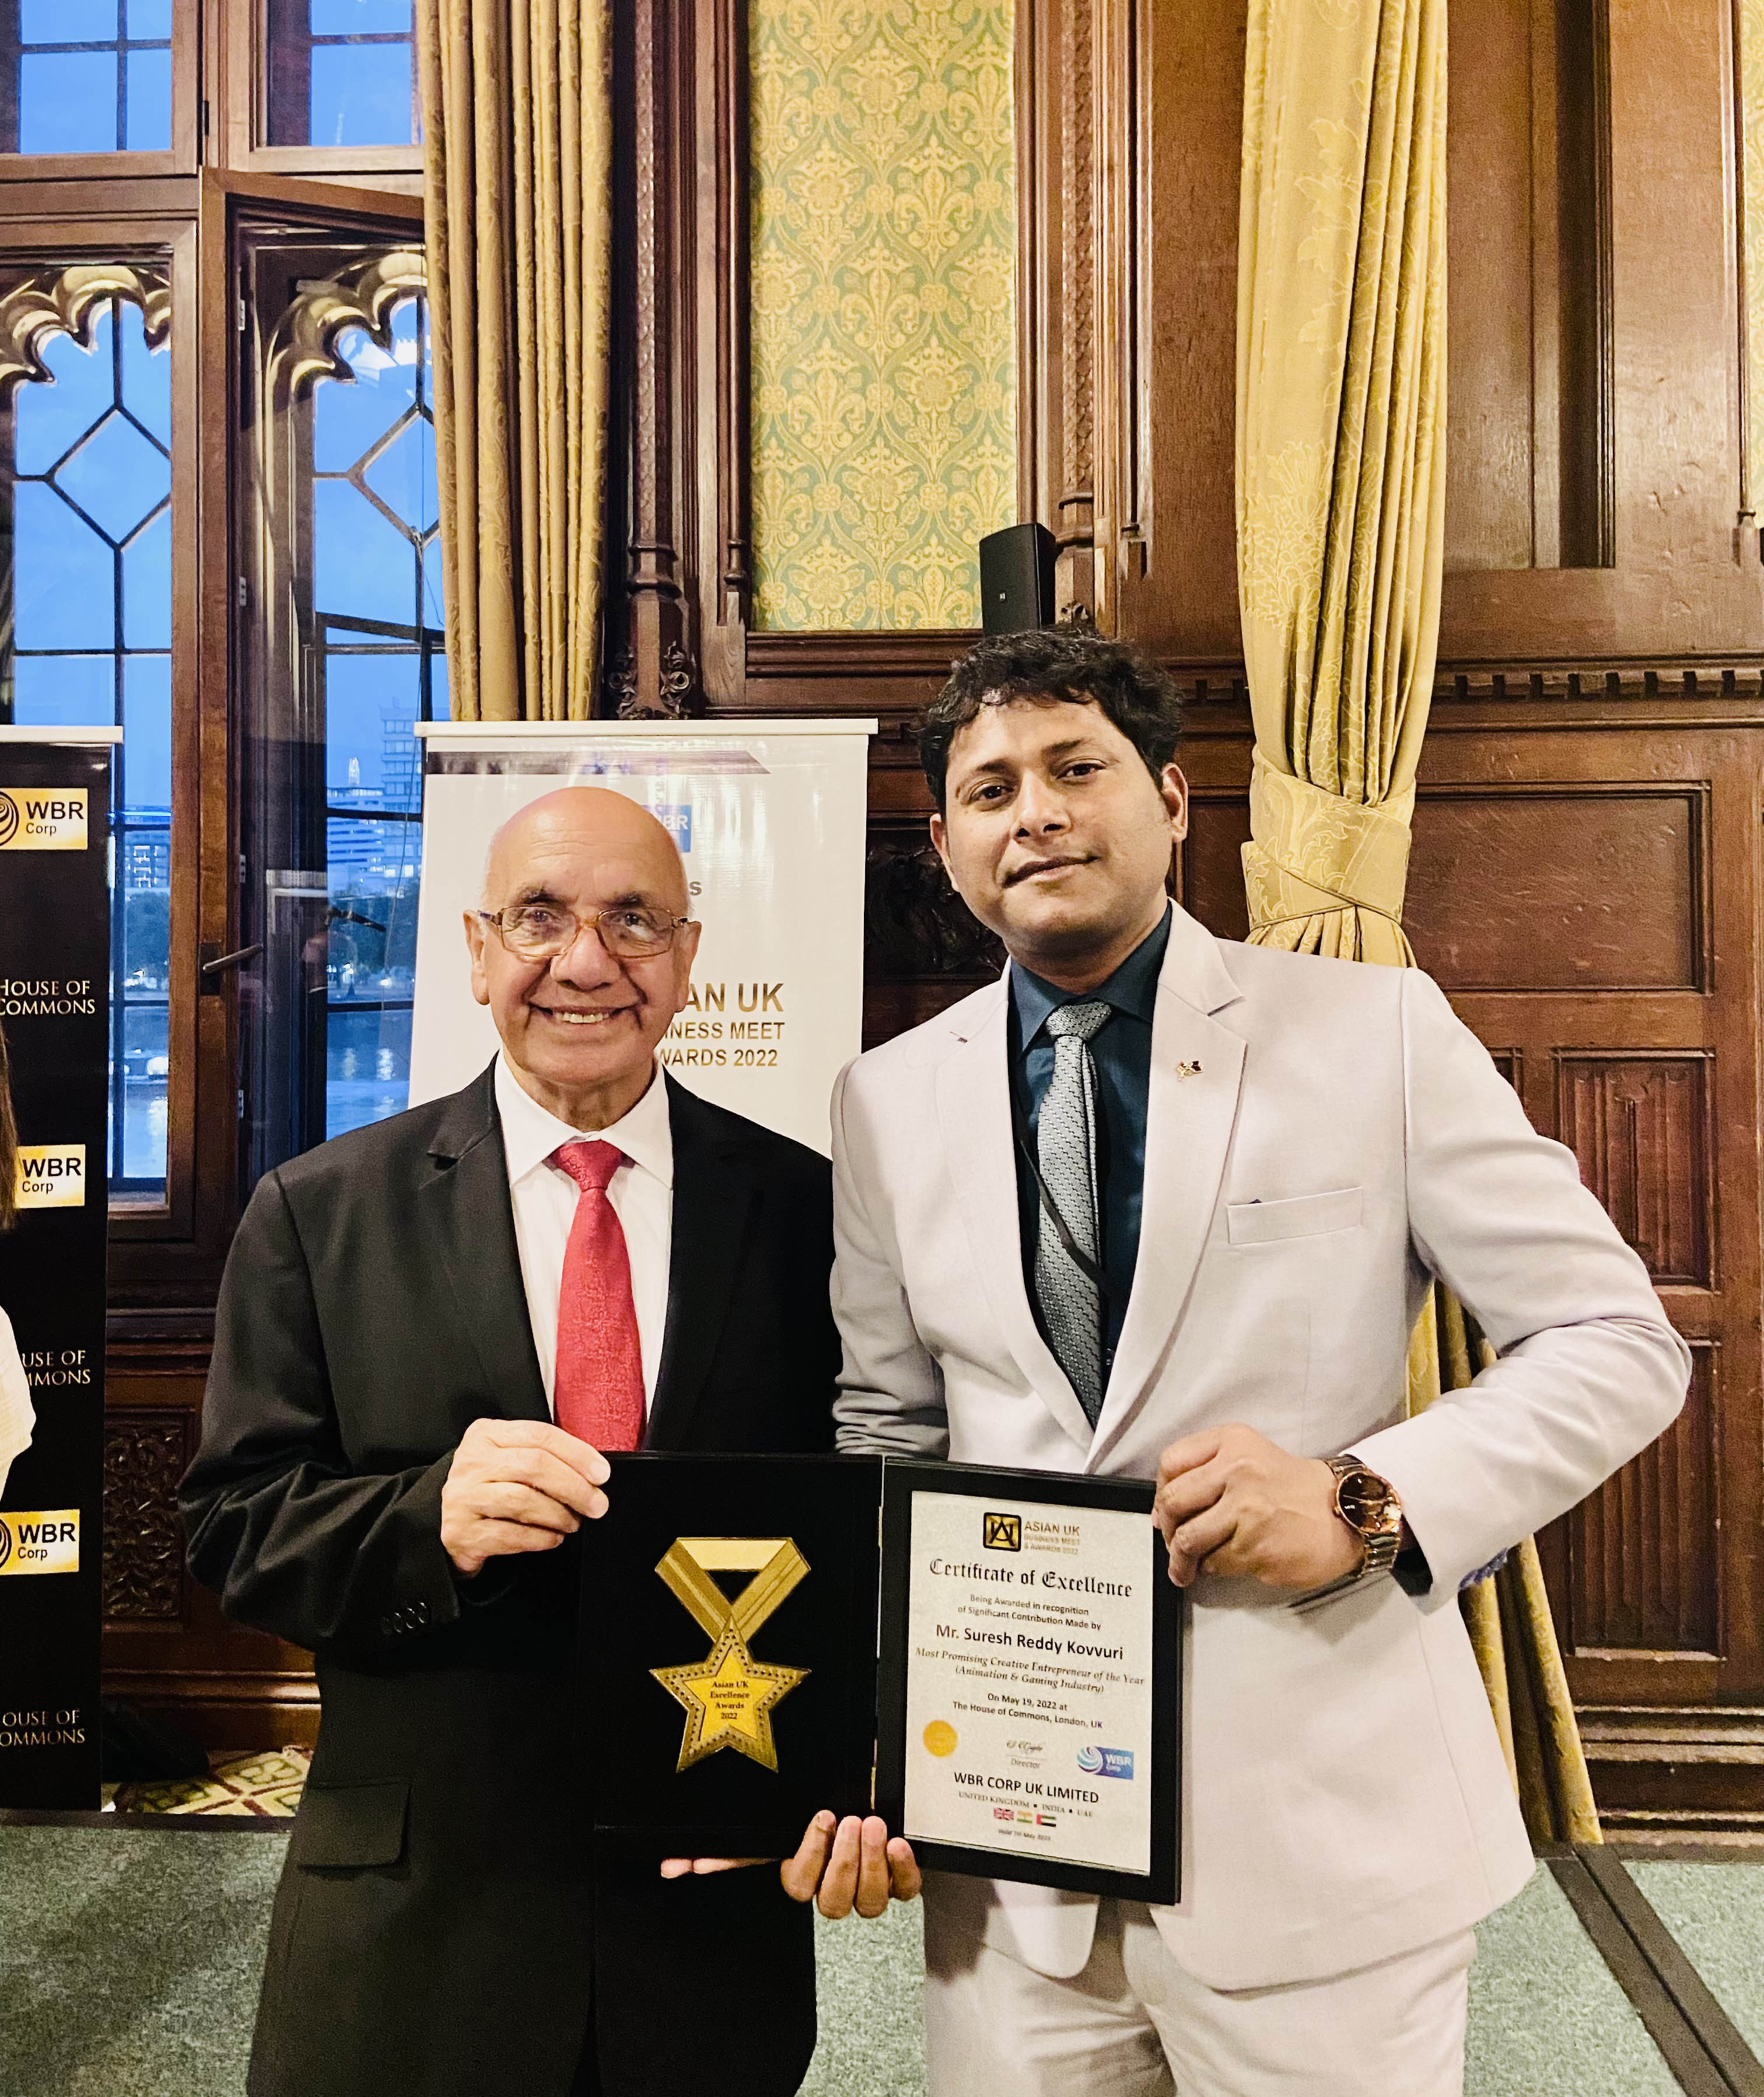 ‘Asian UK Business Meet’ confers the prestigious ‘Most Promising Creative Entrepreneur’ award on Suresh Reddy K., at House of Commons, London!